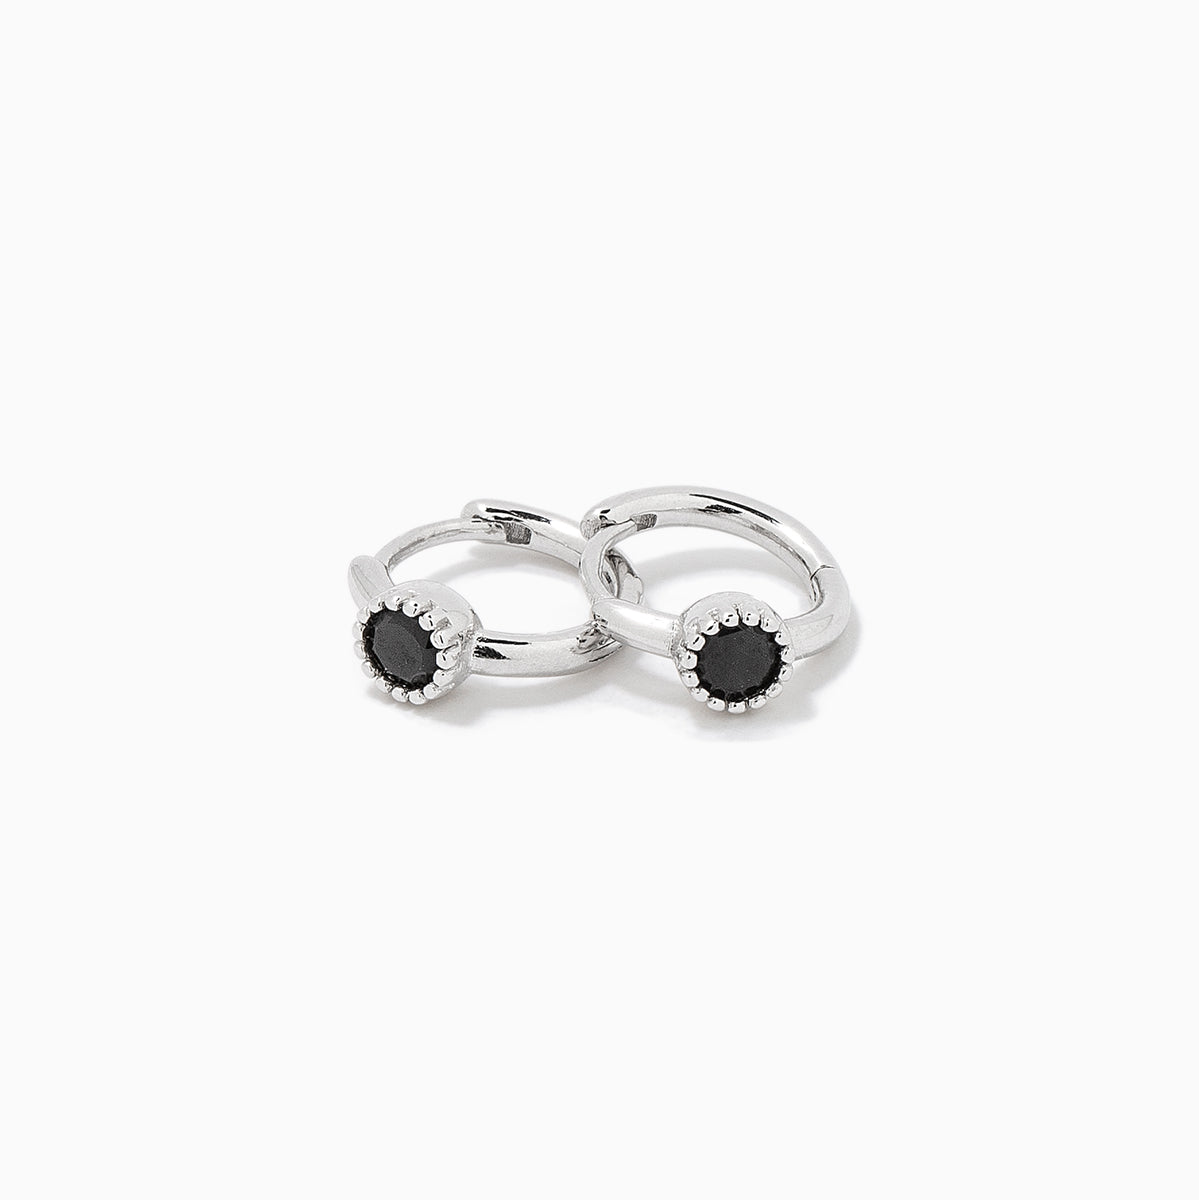 Center Stage Huggie Earrings | Black Sterling Silver | Product Detail Image | Uncommon James